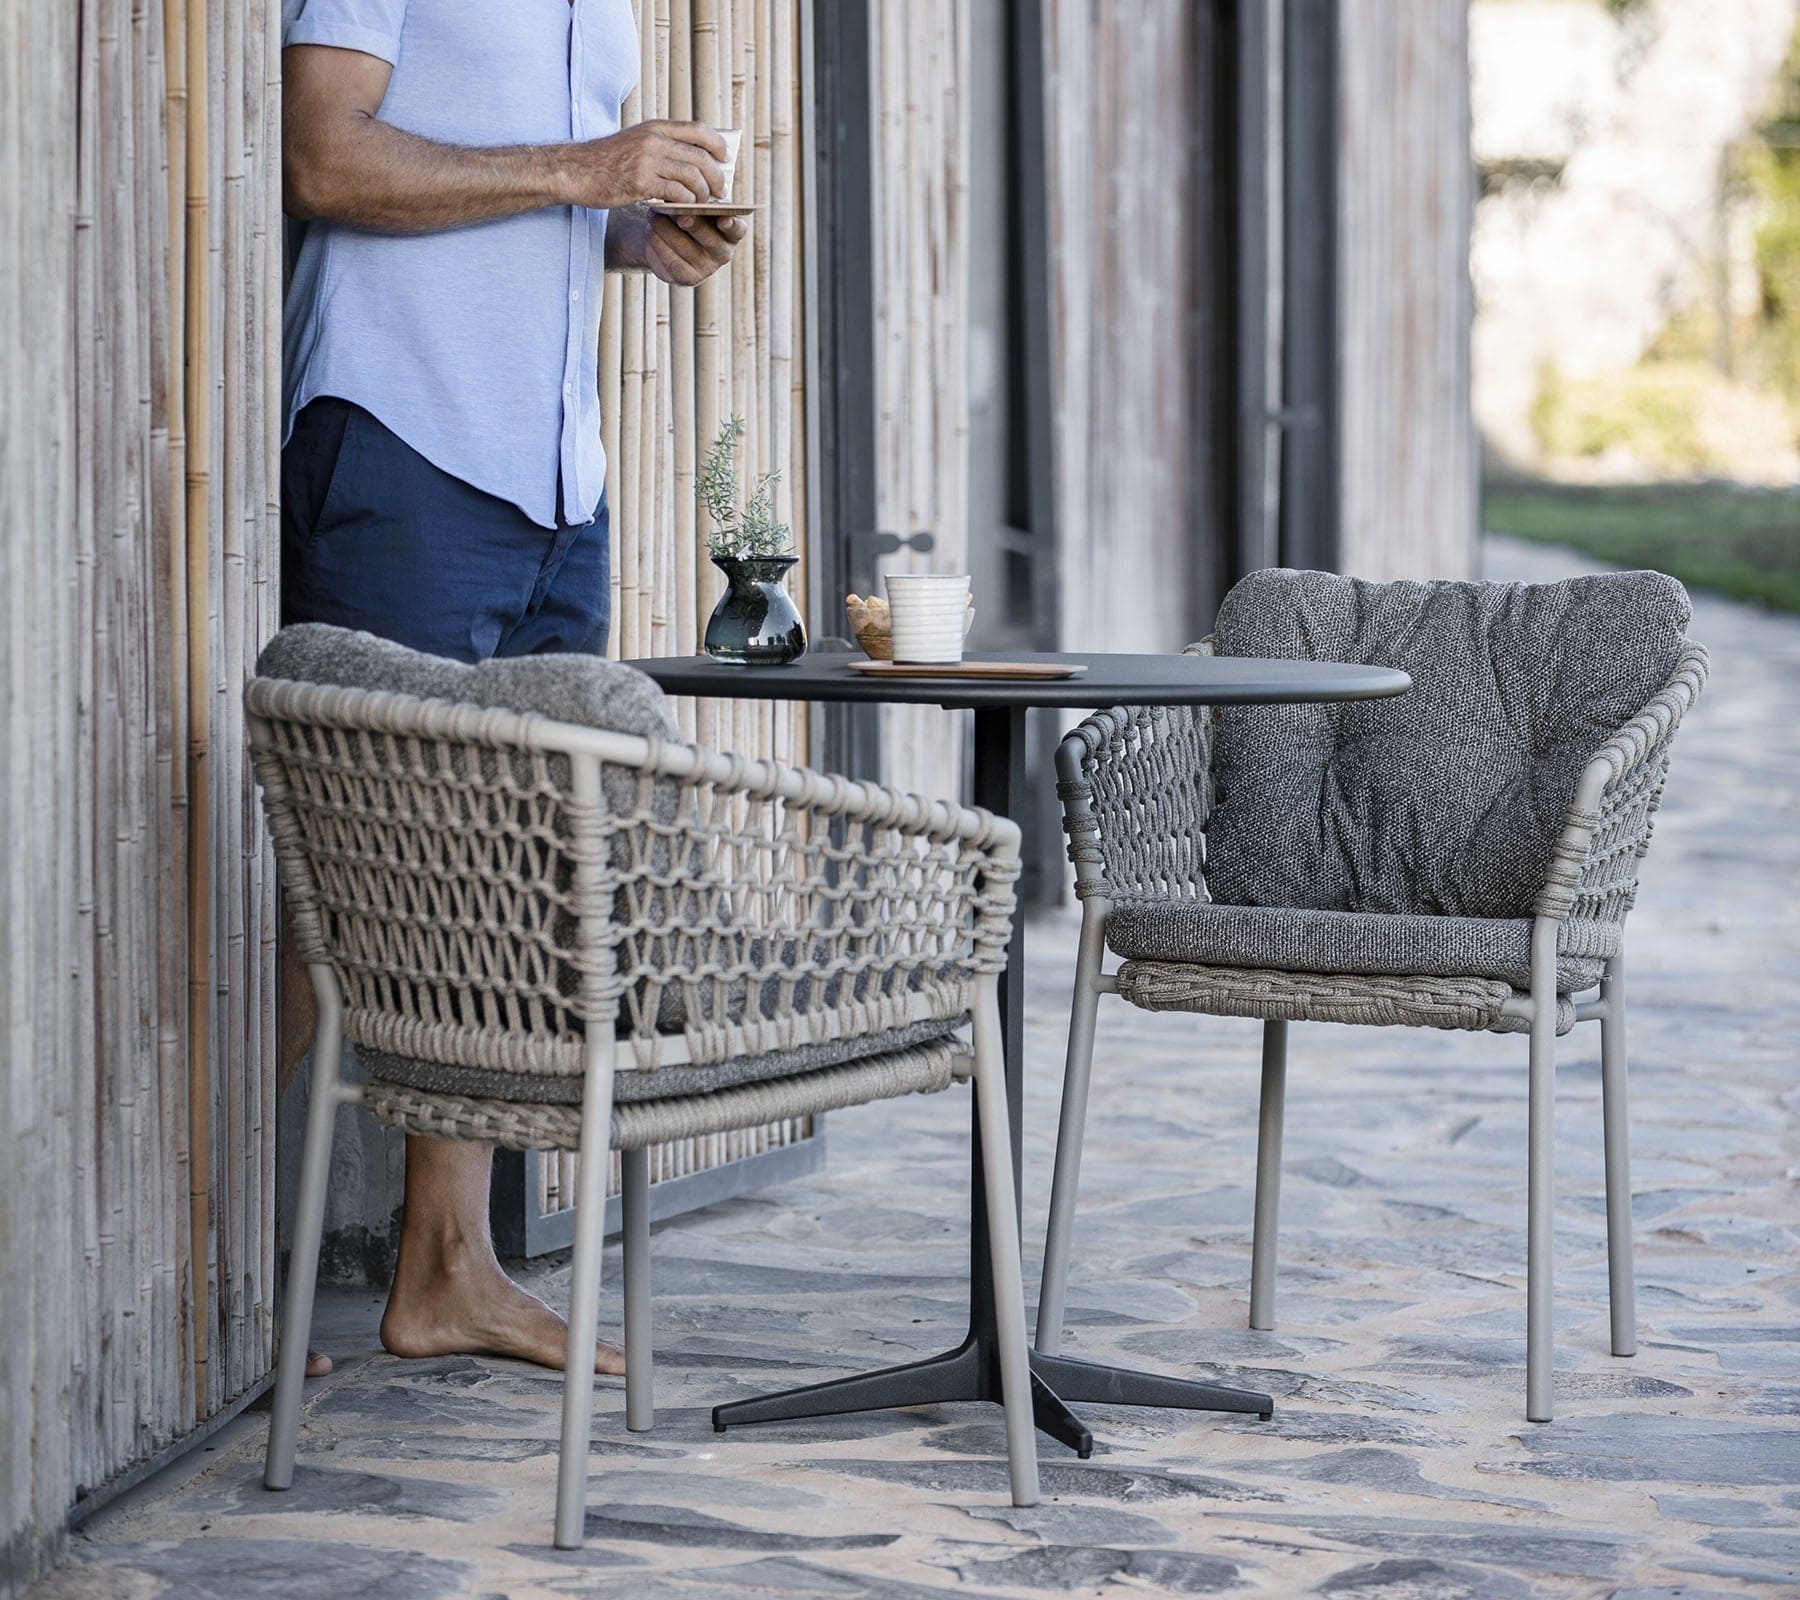 Boxhill's Drop Round Outdoor Cafe Table Lava Grey lifestyle image with 2 dining chairs and a man standing beside holding a cup